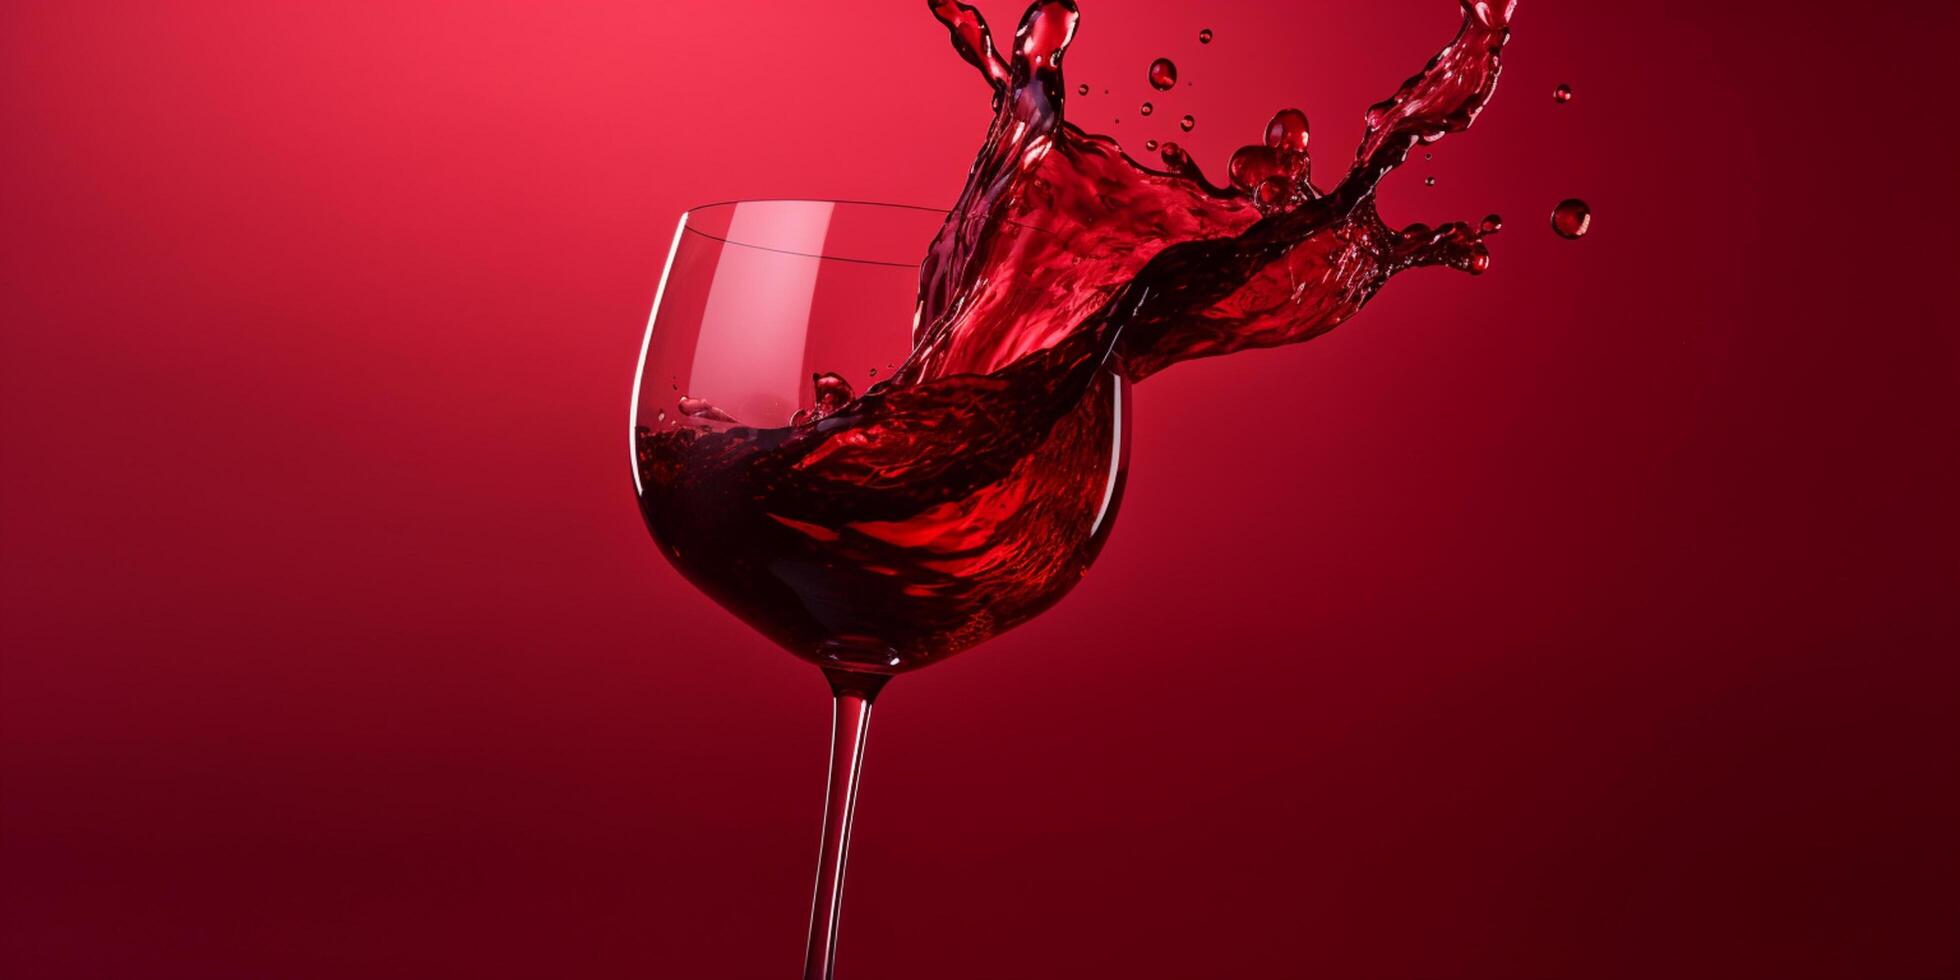 AI generated Splashing red wine in a wine glass imitation close up on red background photo